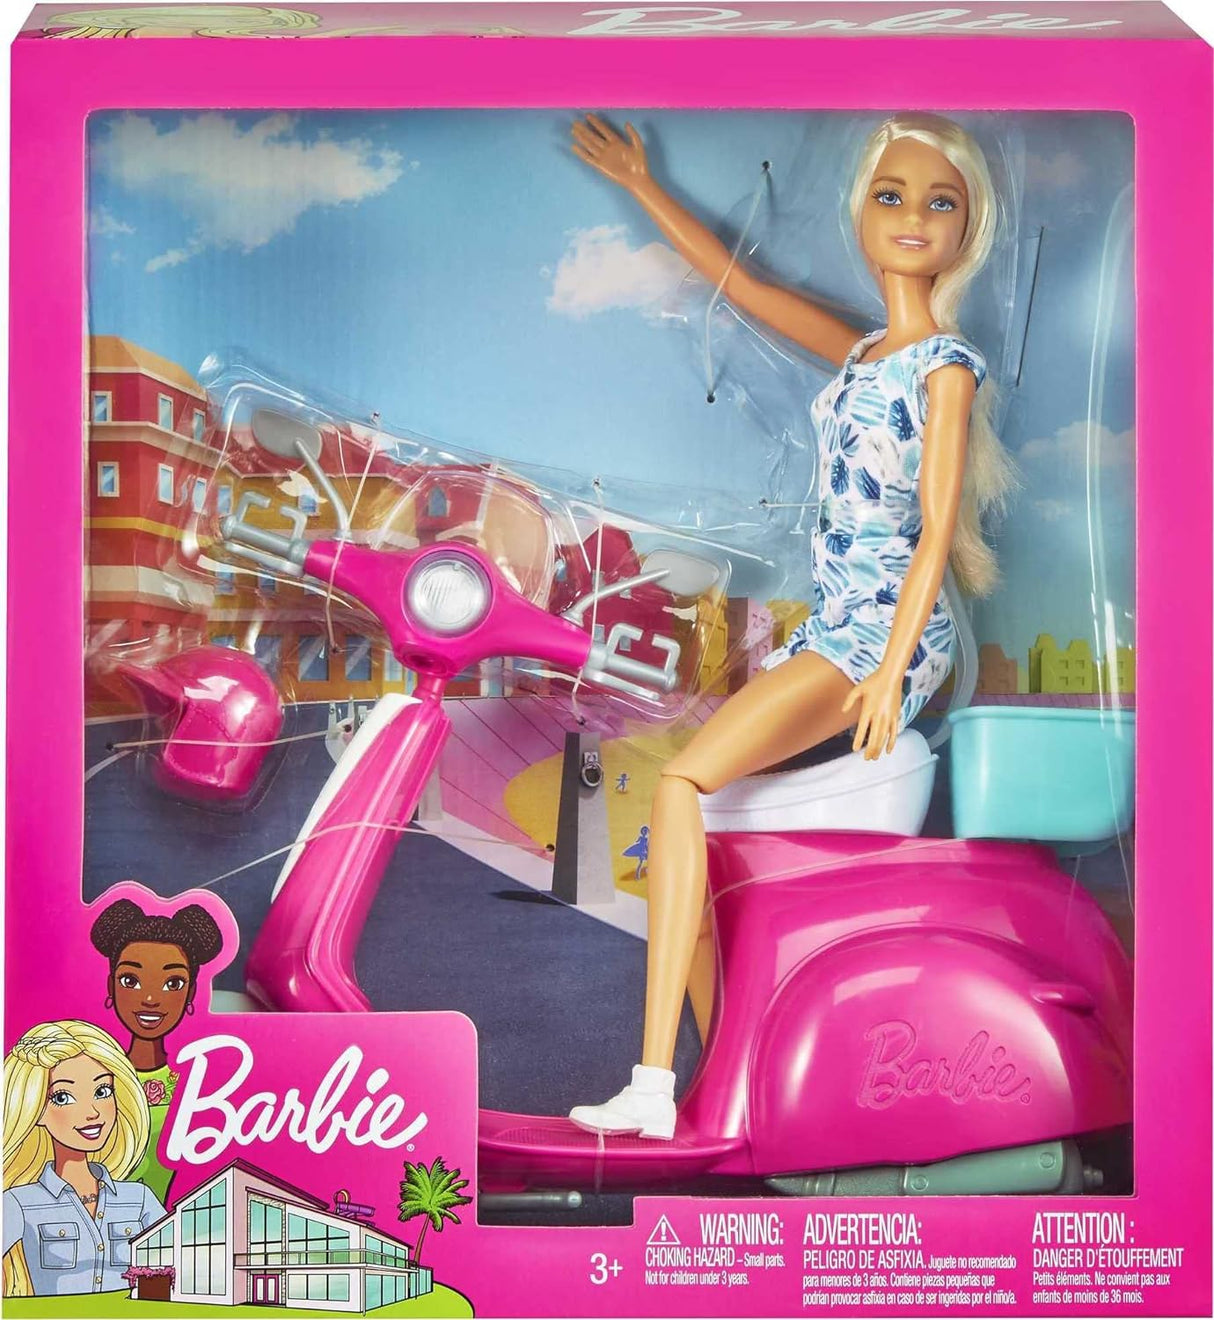 Barbie & Scooter